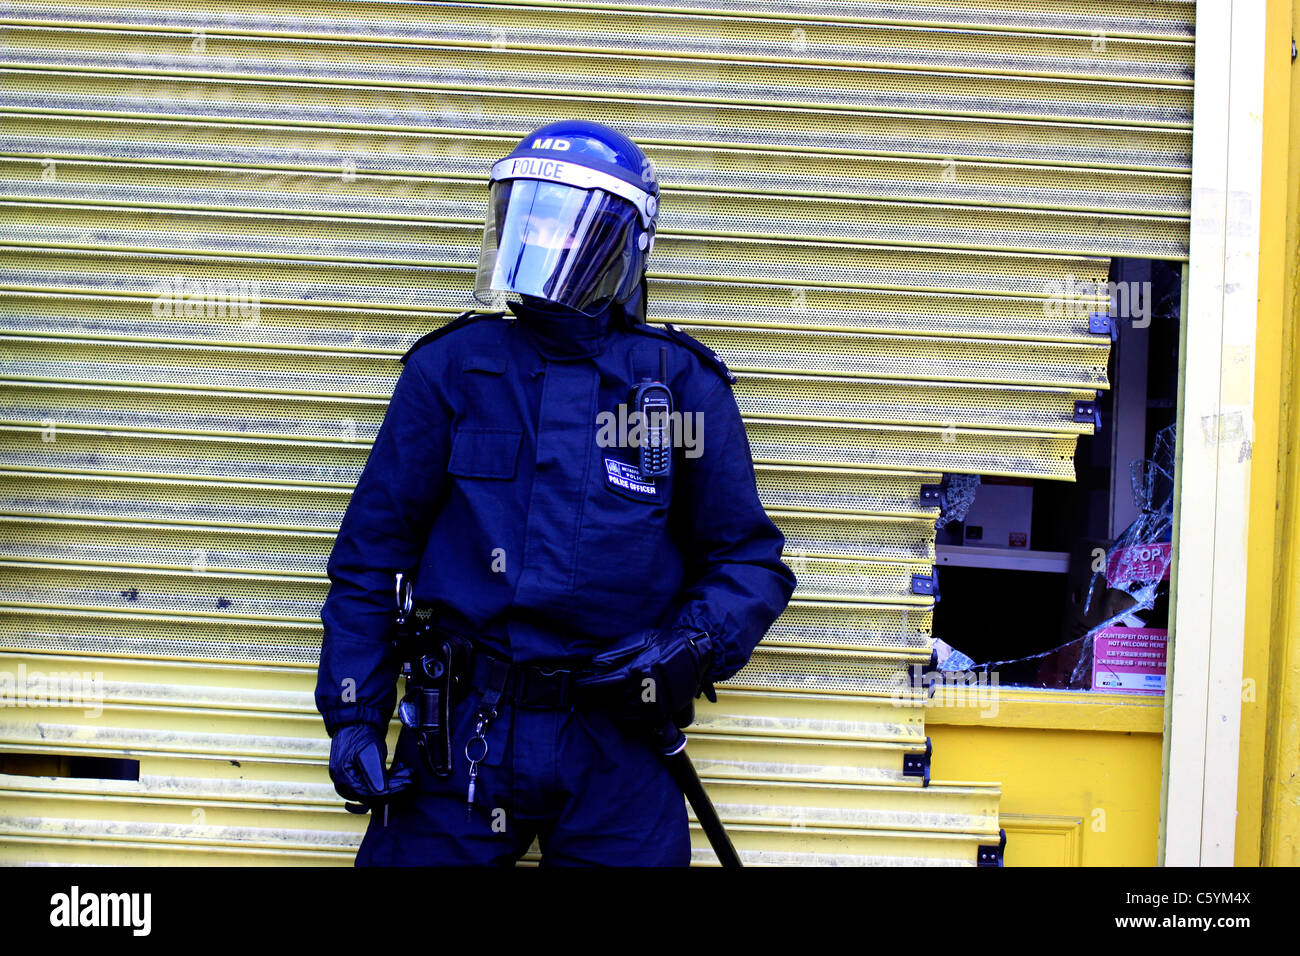 Riot policeman guarding a shop in Hackney during the riot in August 2011 Stock Photo